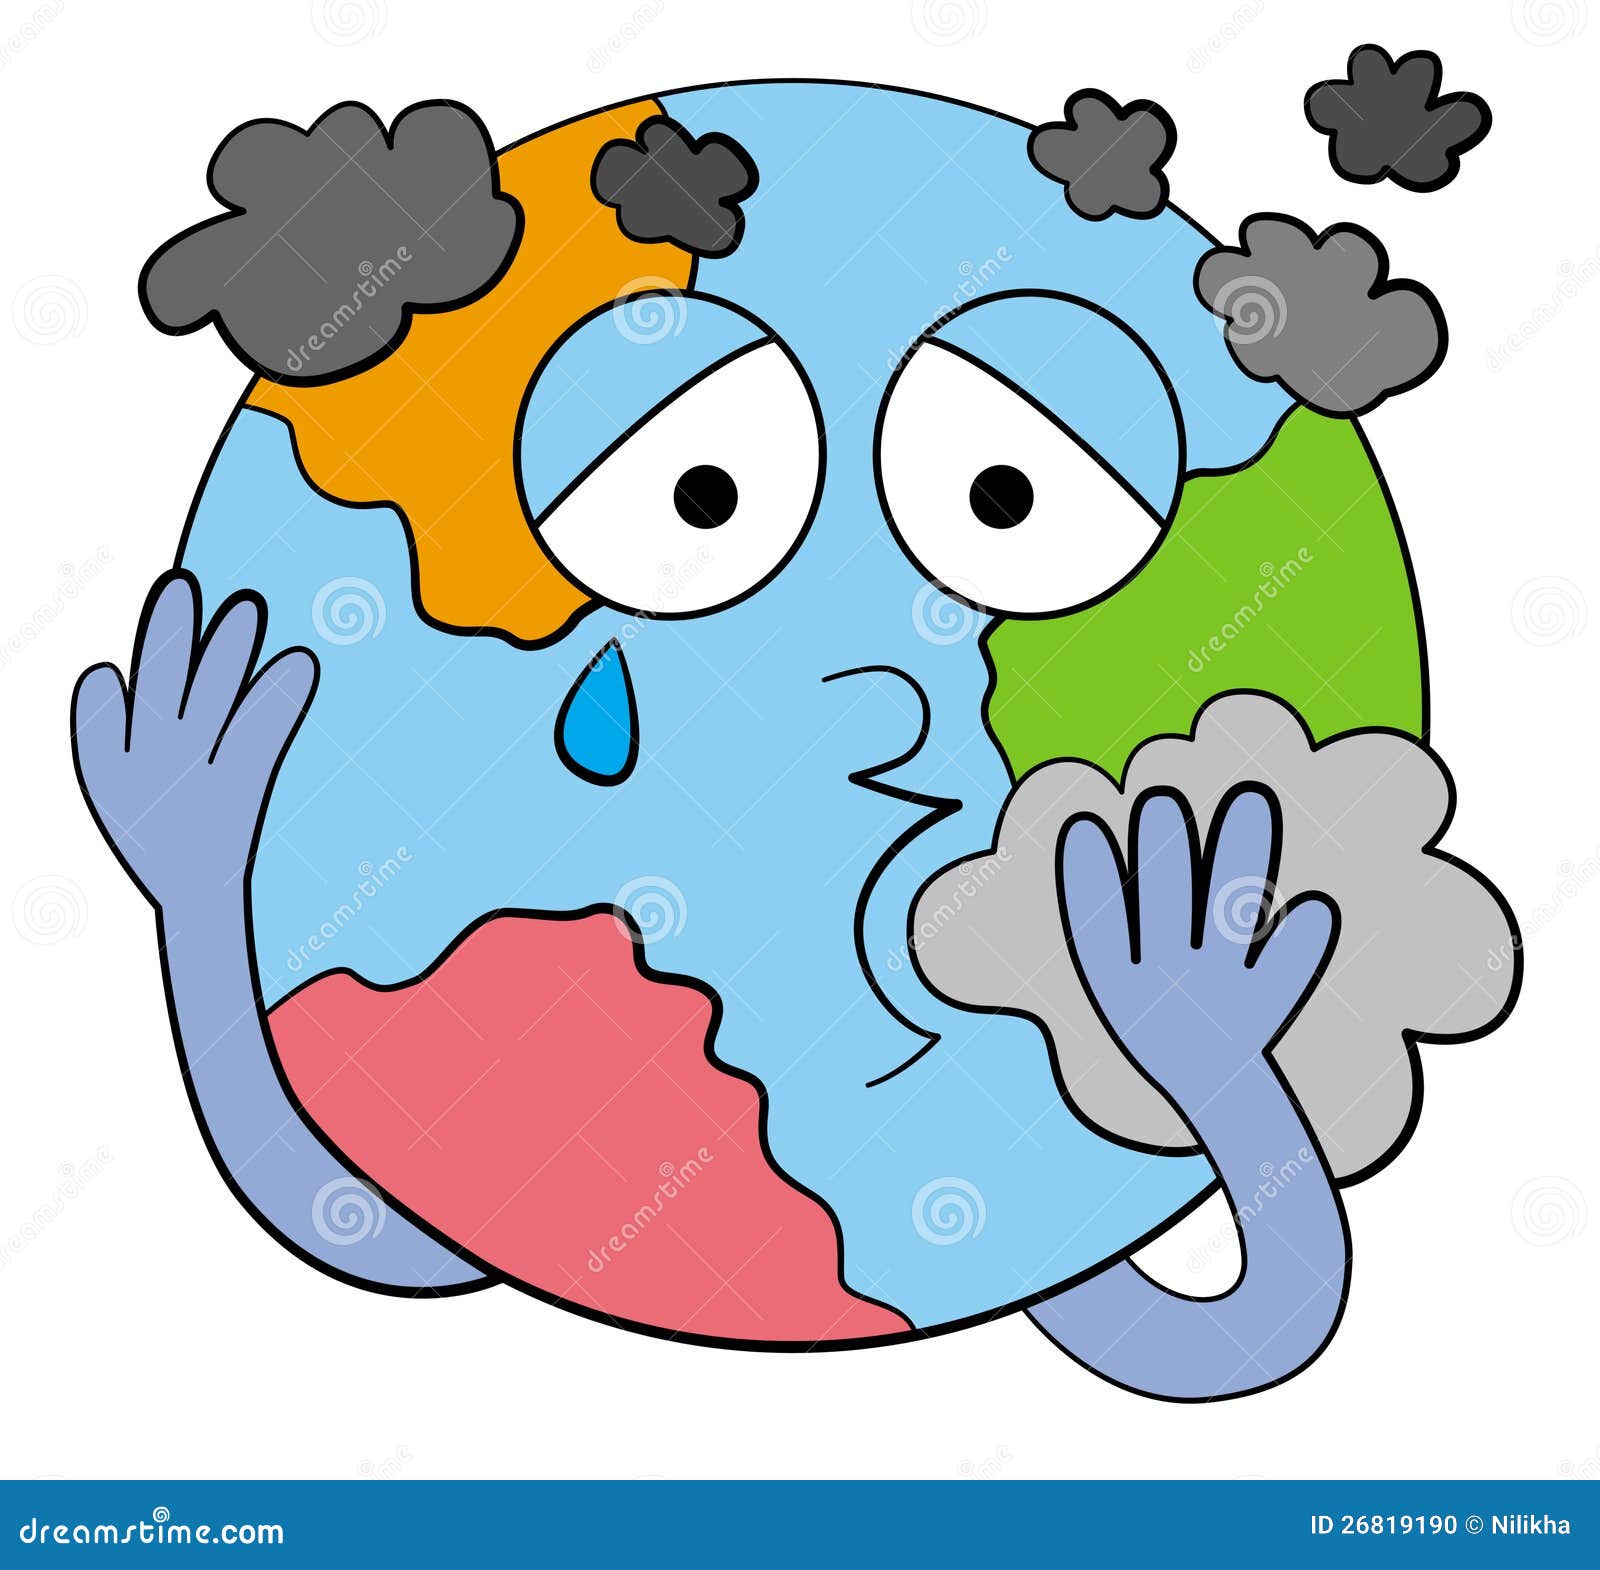 clipart on pollution - photo #47